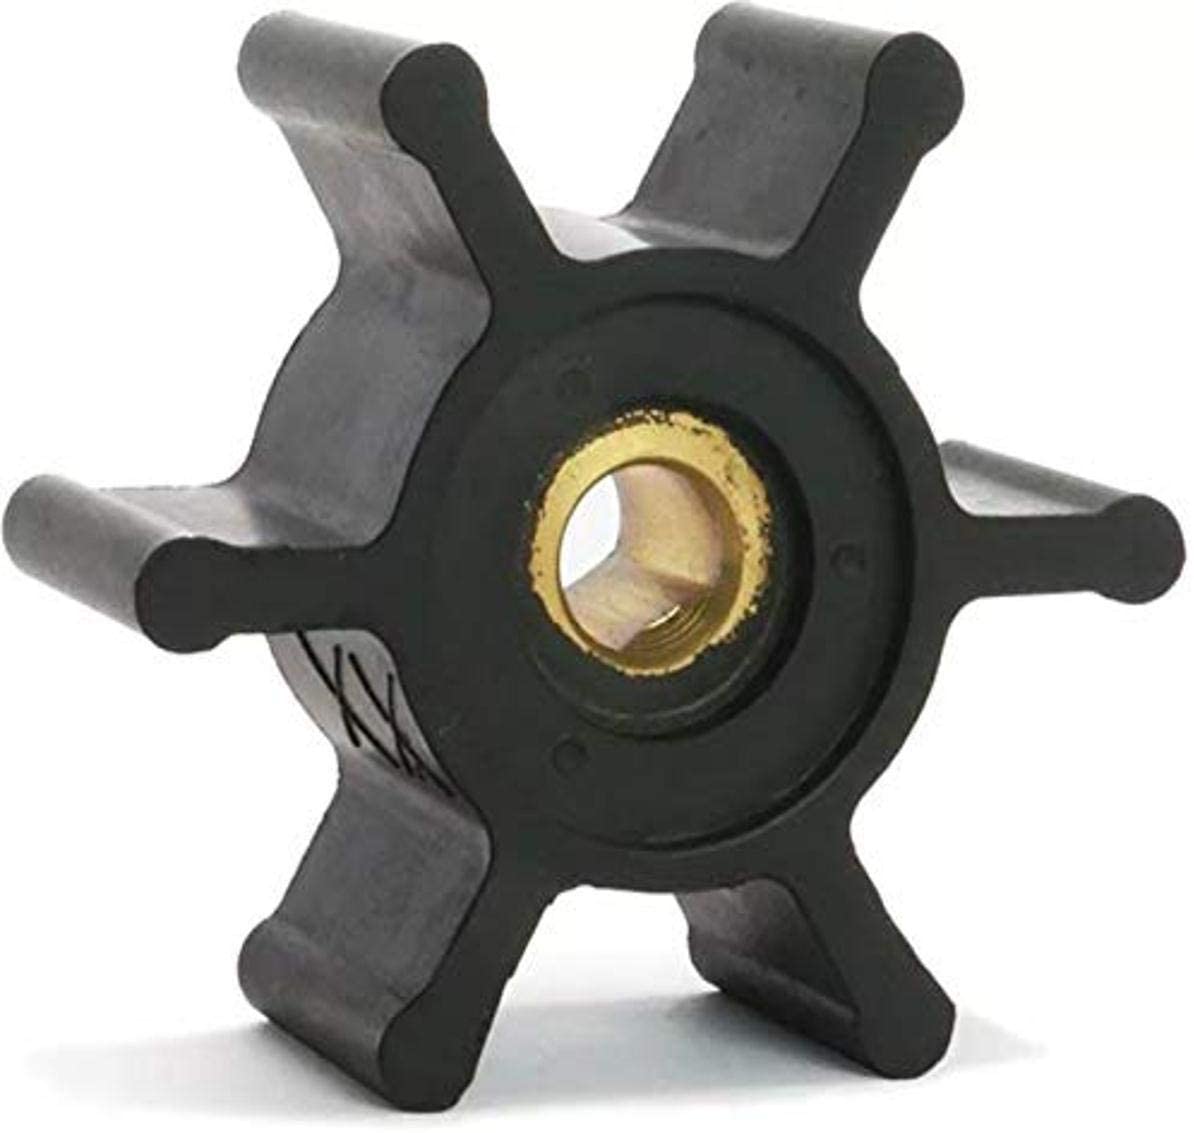 Jabsco - Run-Dry Utility Puppy Pump, Part No. 6303-0003-P - Impeller For 23920-9423 & 9523